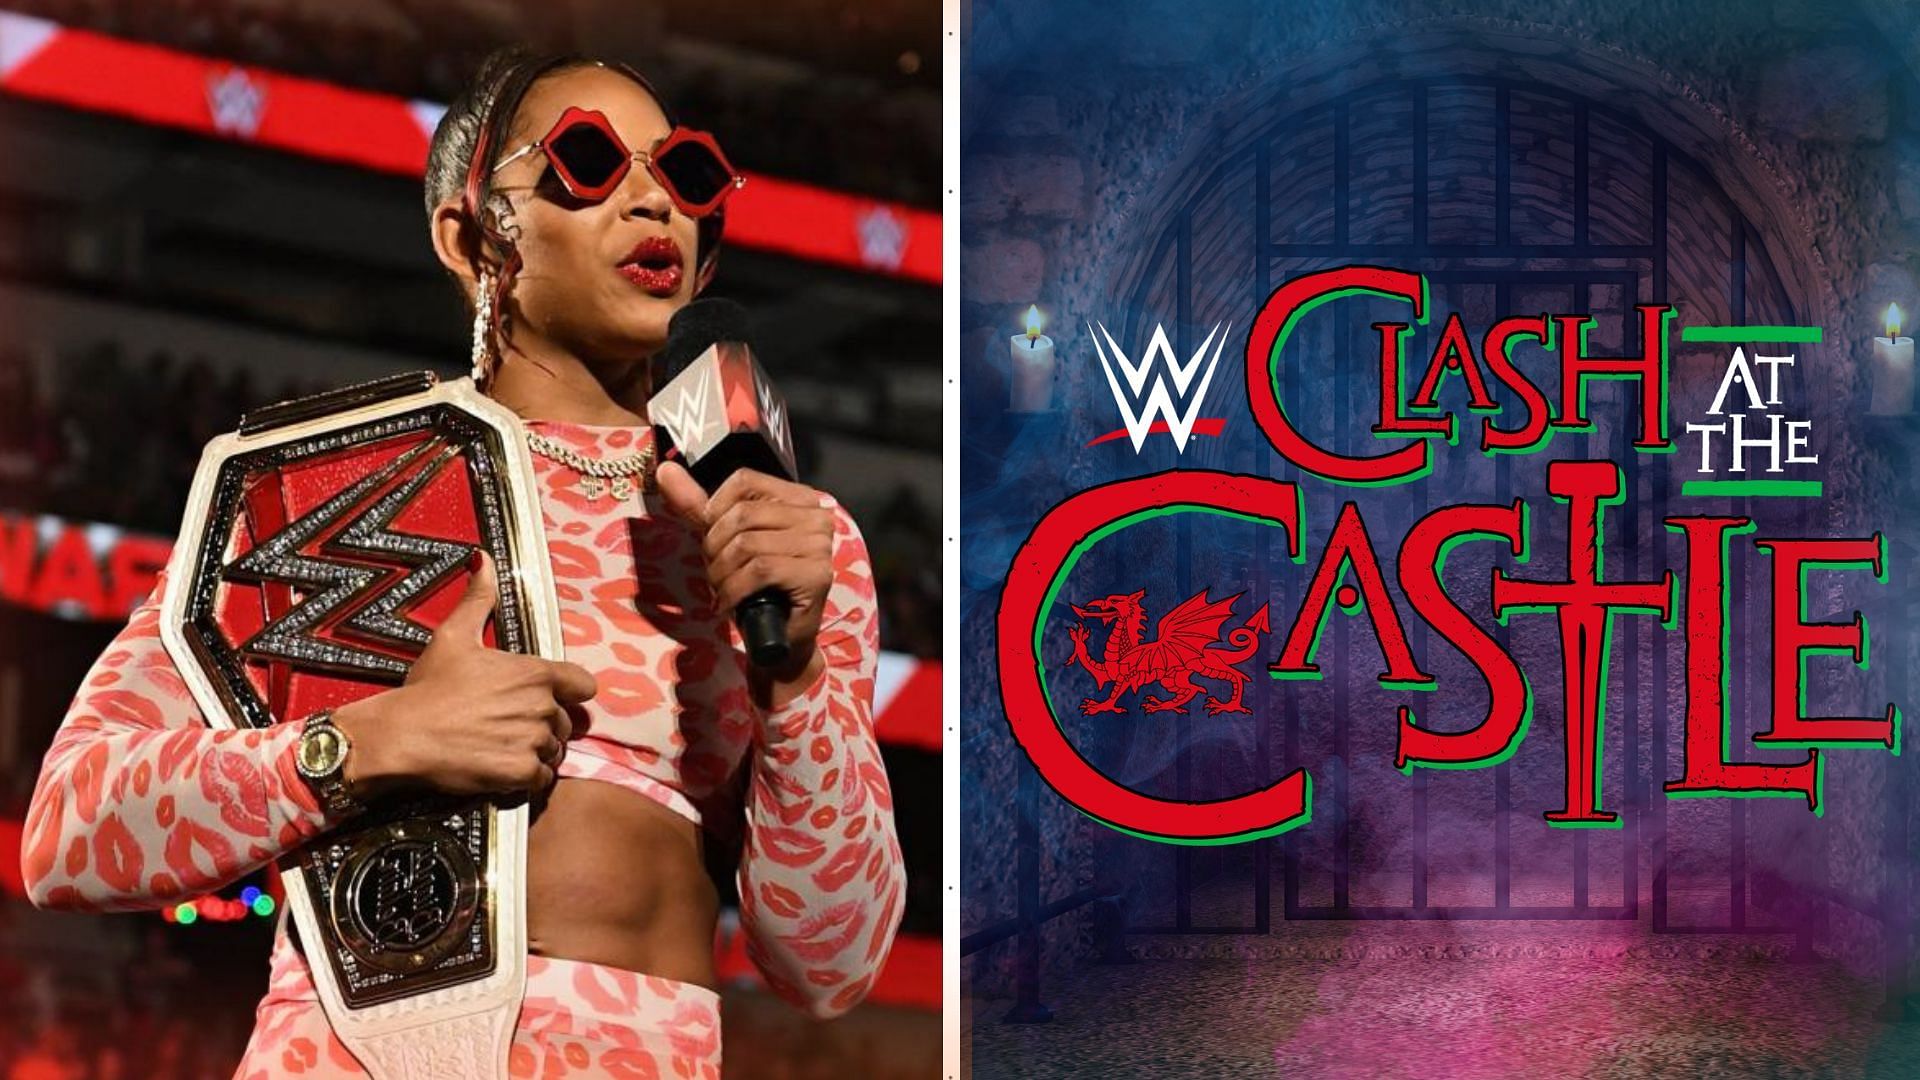 Bianca Belair is ready for the challenge at WWE Clash at the Castle